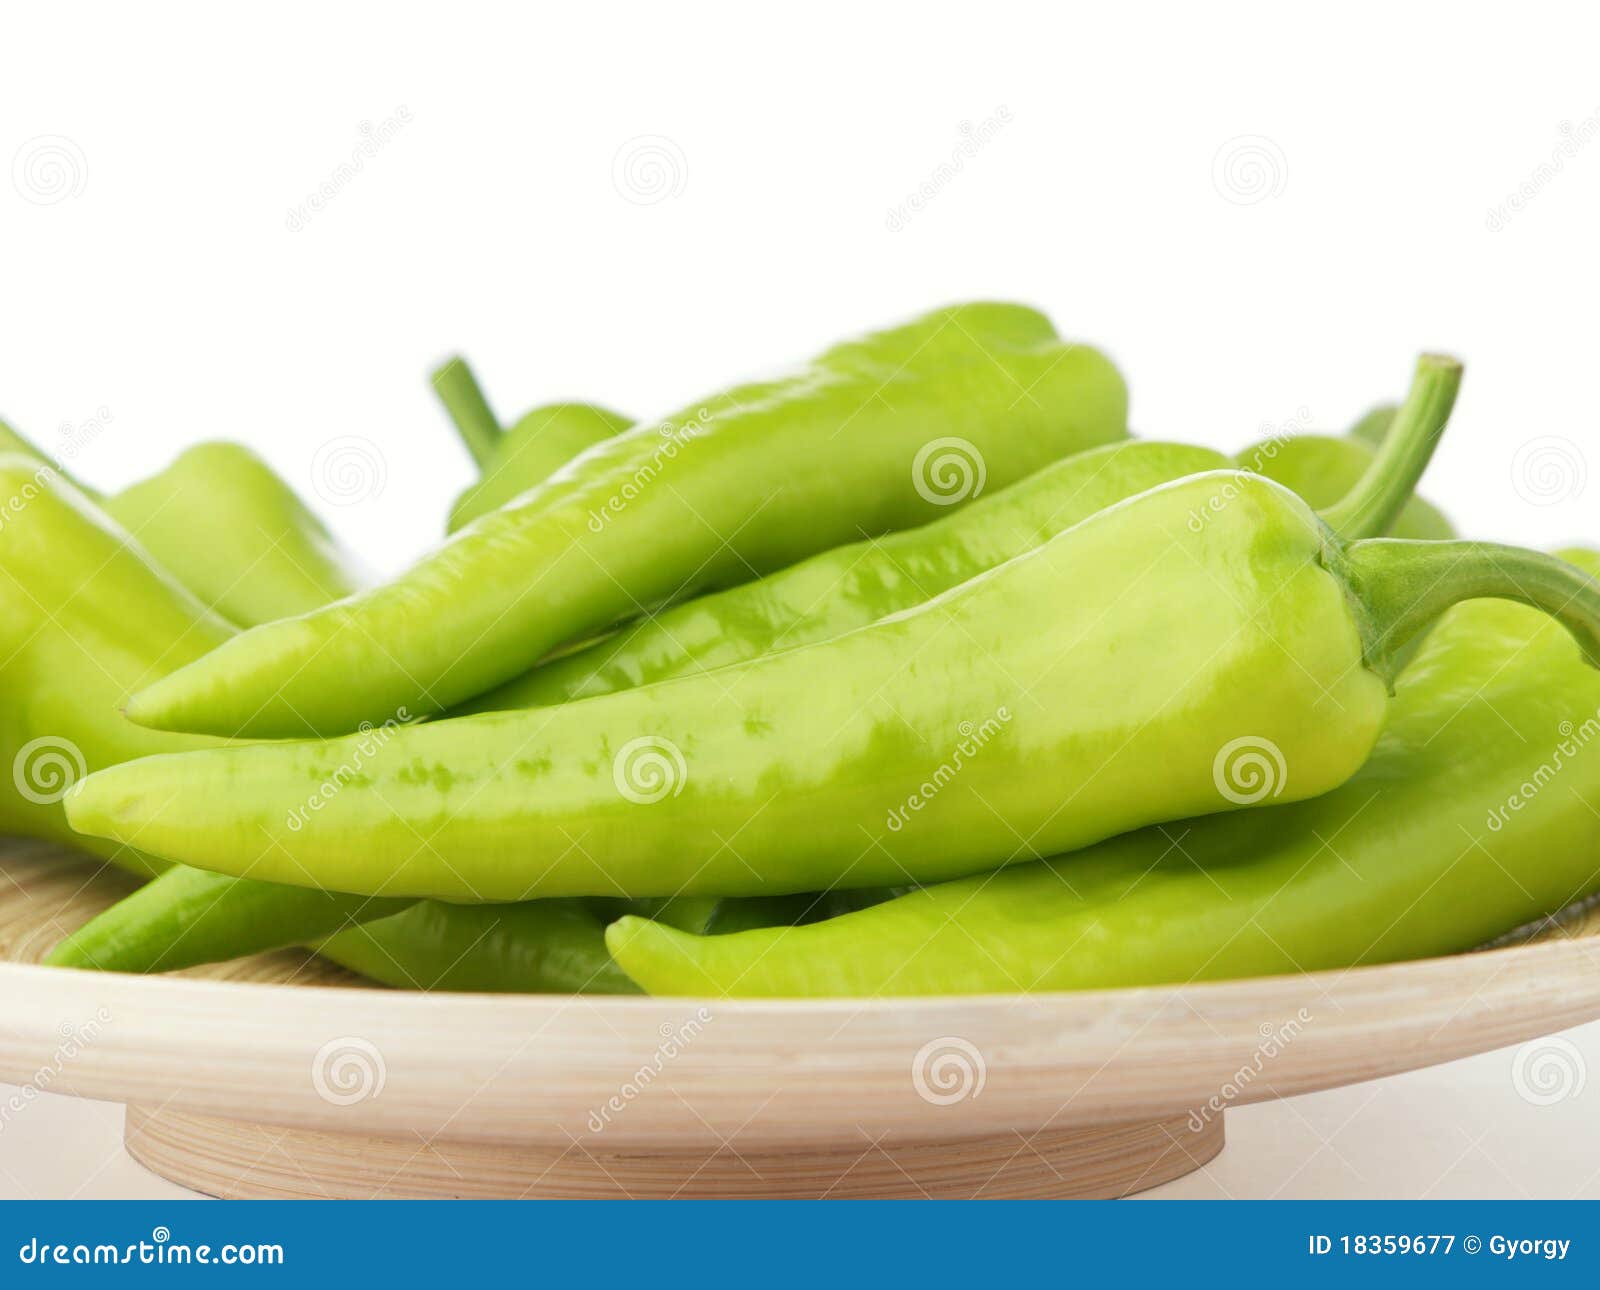 5,800+ Green Paprika Stock Videos and Royalty-Free Footage - iStock